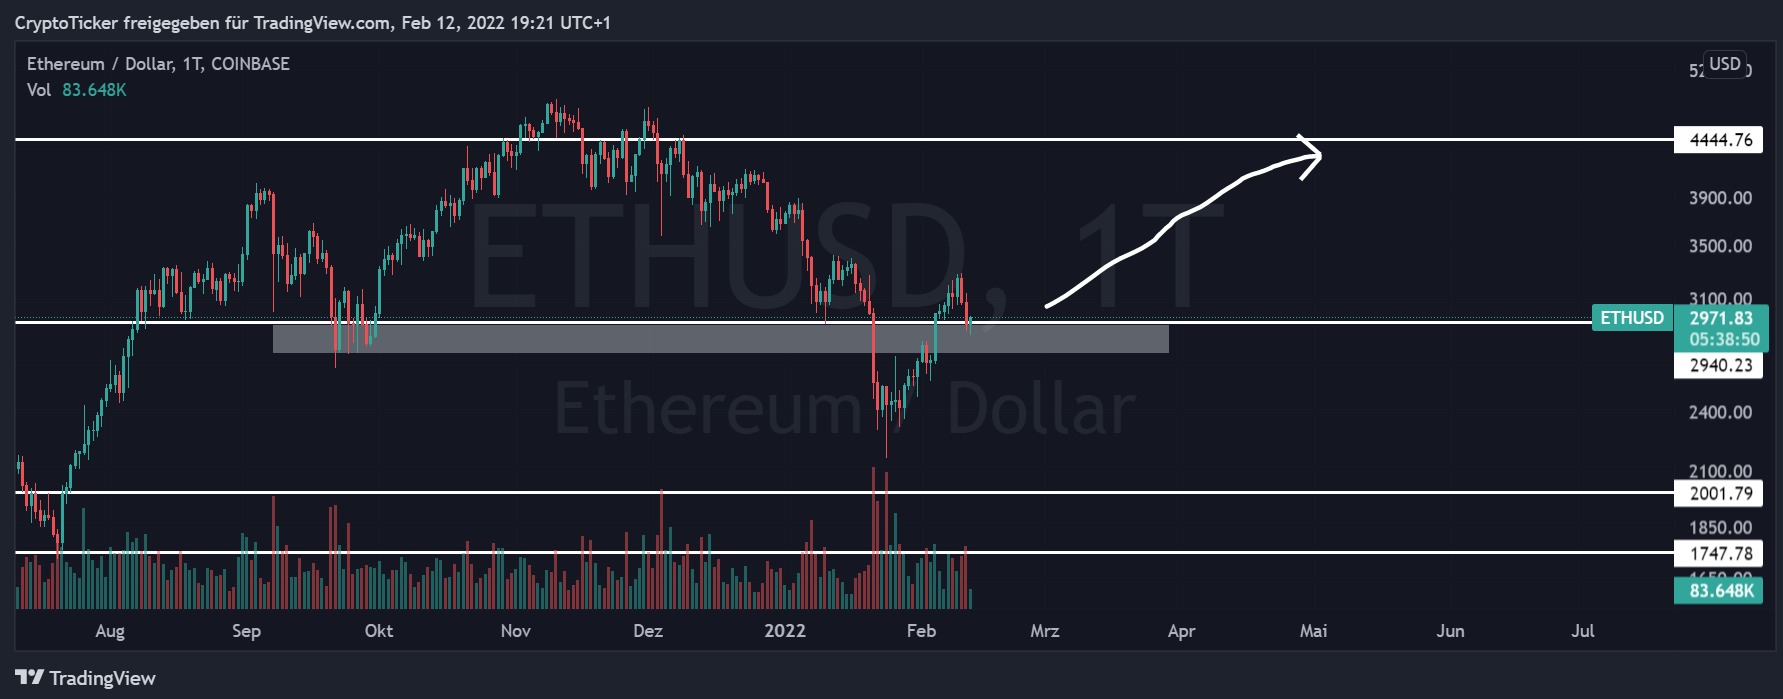 ETH/USD 1-day chart showing the strong support of Ether price prediction